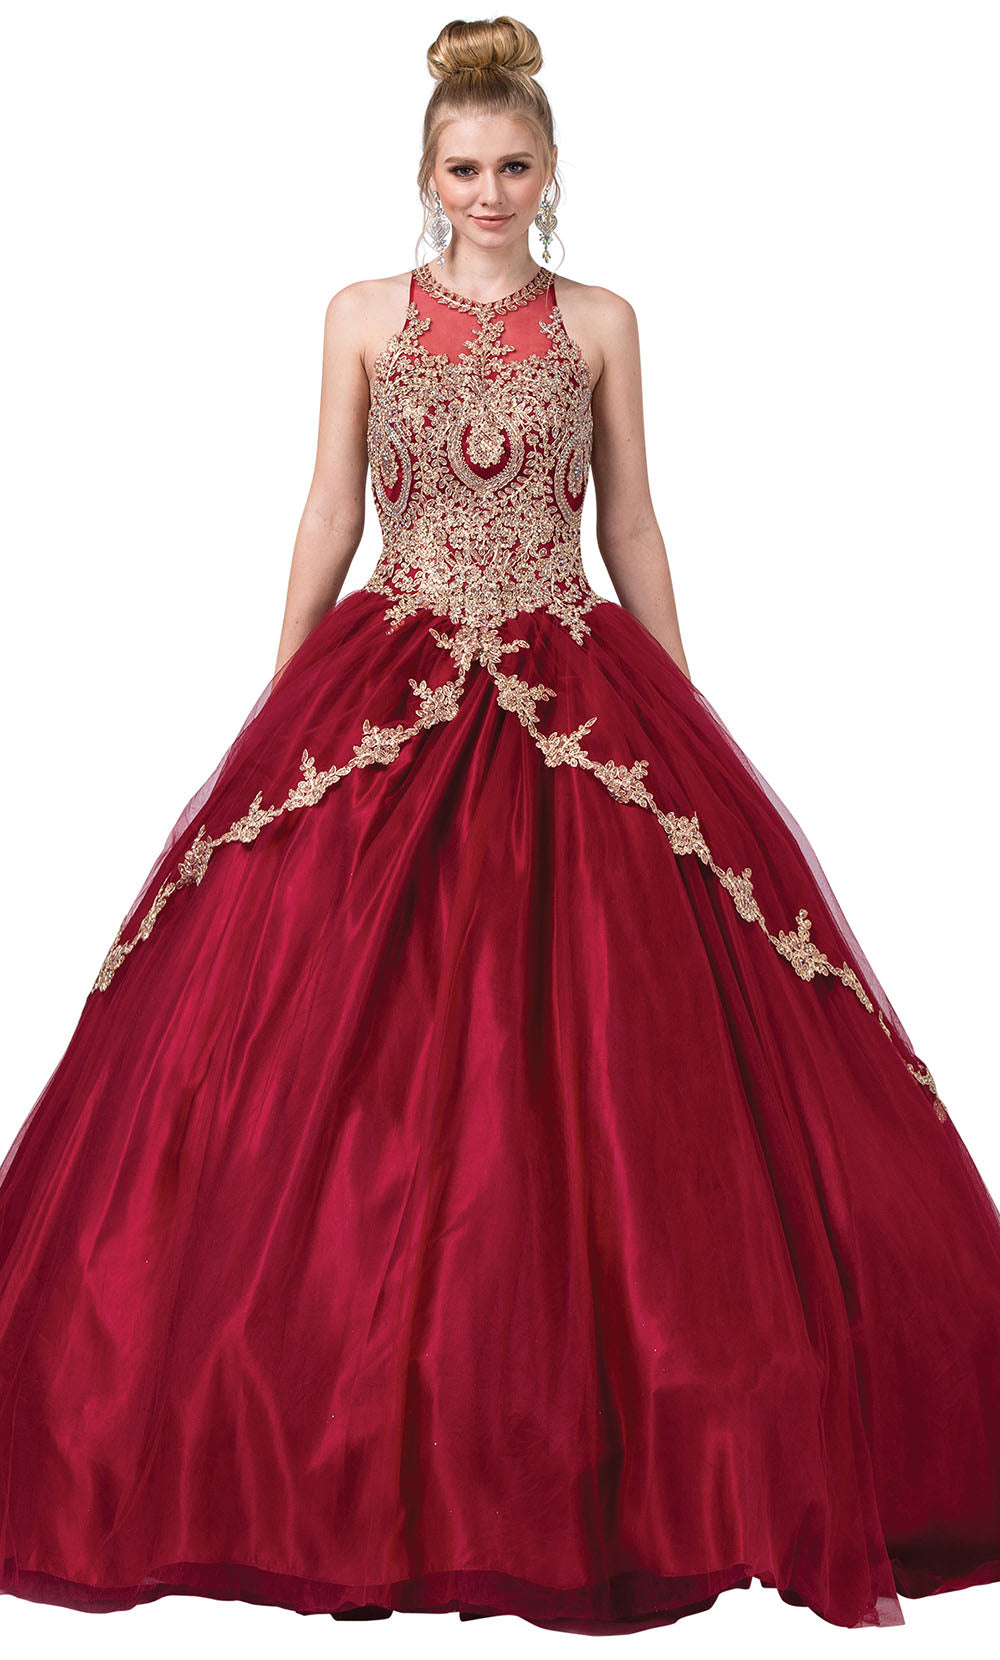 Dancing Queen - 1326 Embroidered Halter Neck Ballgown In Red